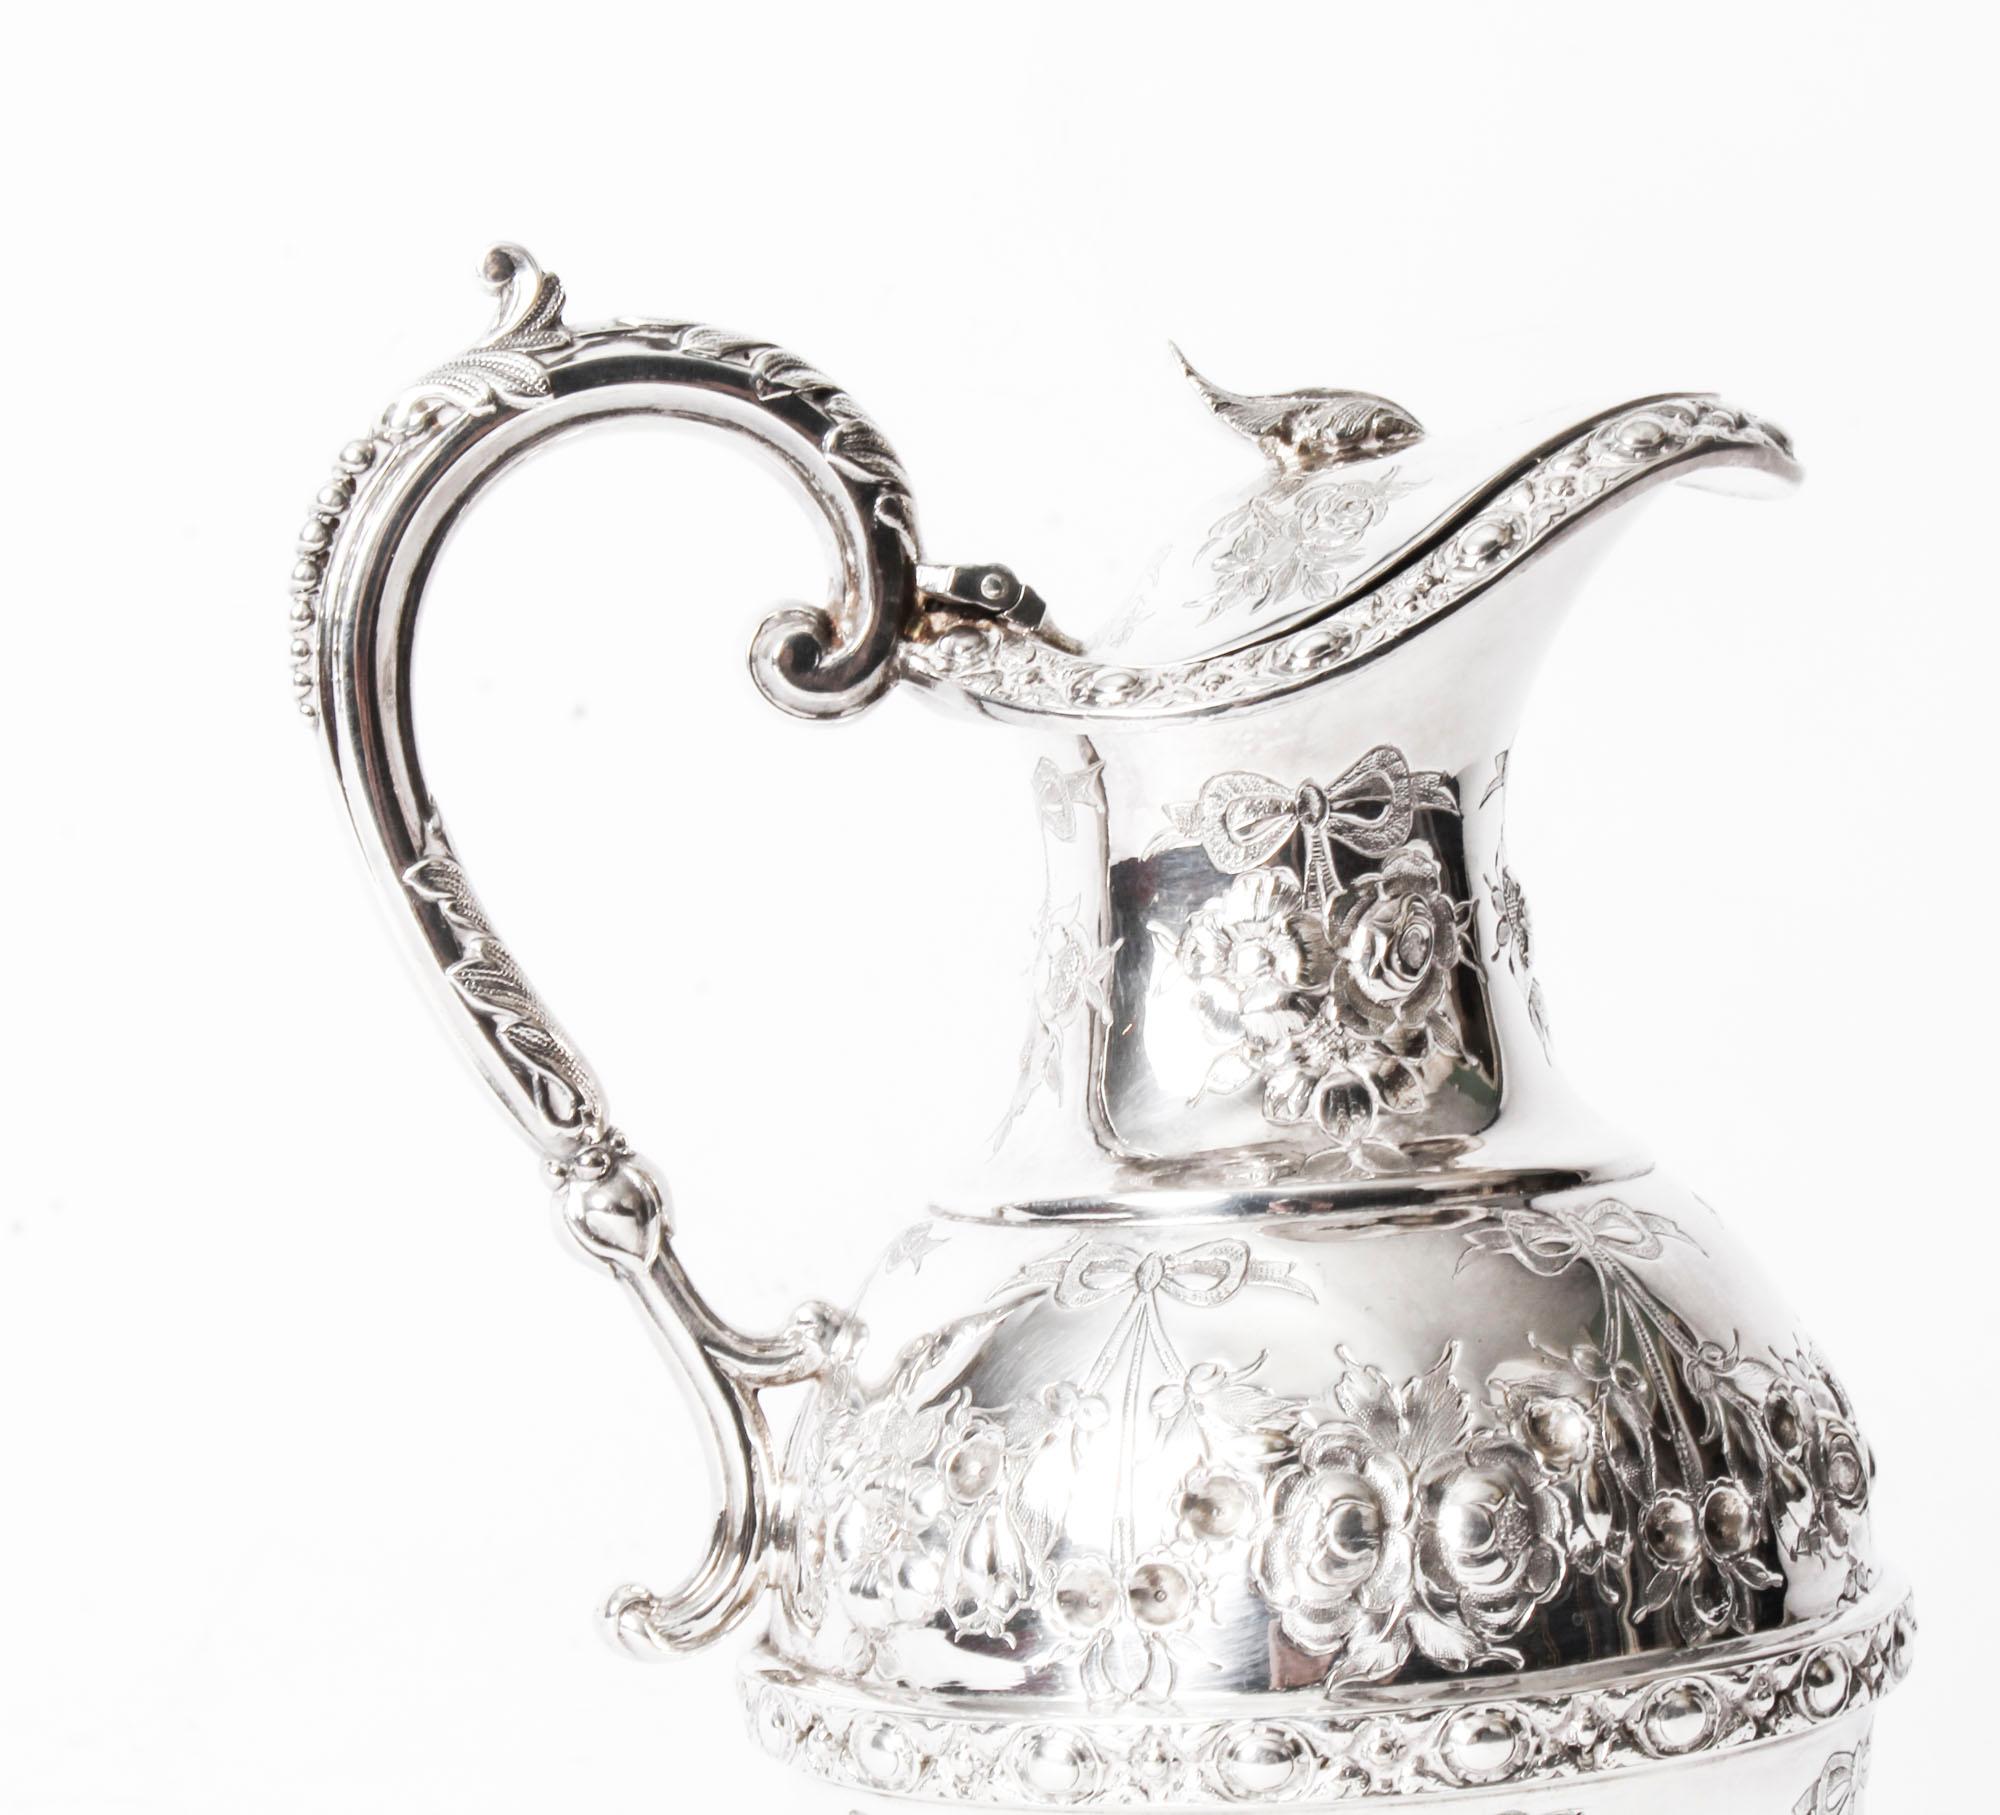 This is a truly stunning English Victorian silver-plated claret jug, bearing the makers' mark of the renowned silversmiths, Martin Hall & Co, Sheffield, circa 1880 in date.
 
This magnificent claret jug has a charming rounded shape, stands on an